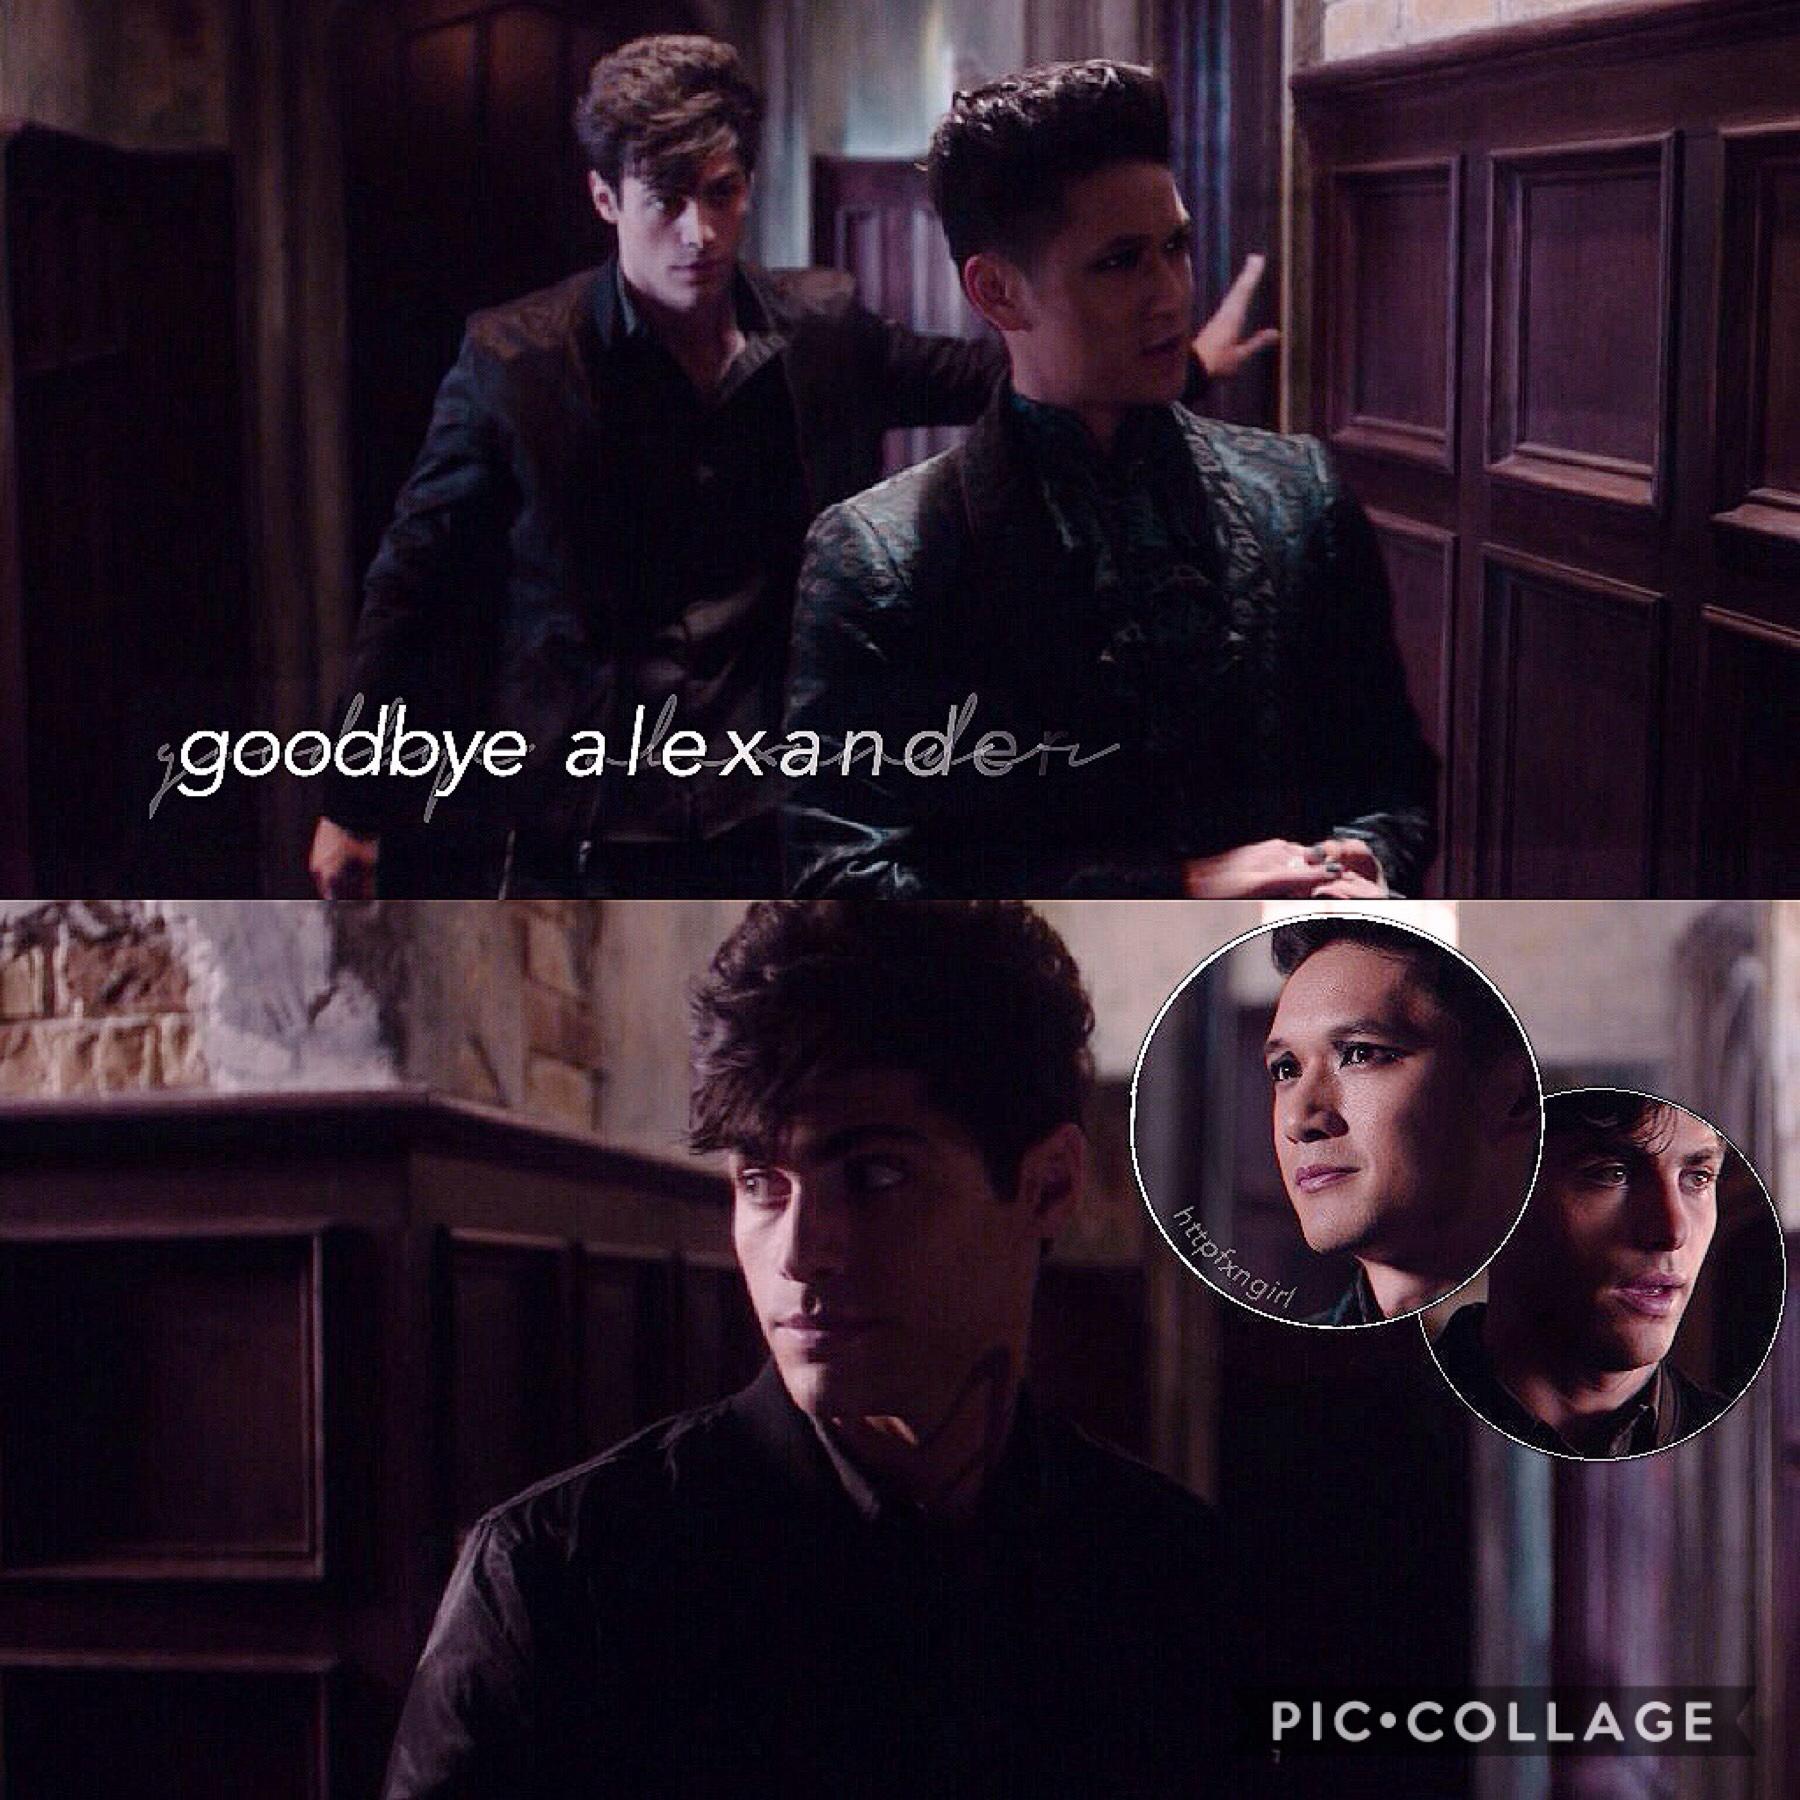 season 1 episode 9 — rise up ➰
HAPPY FALL 🎃🍂🍁
"goodbye alexander" i'm sTILL SOBbiNg 😭
guys kat is going to be on season 7 of arrow and I can't help but think that maybe the CW will pick up shadowhunters!!! 
q// favourite fall thing?
a// PSL's and my birth